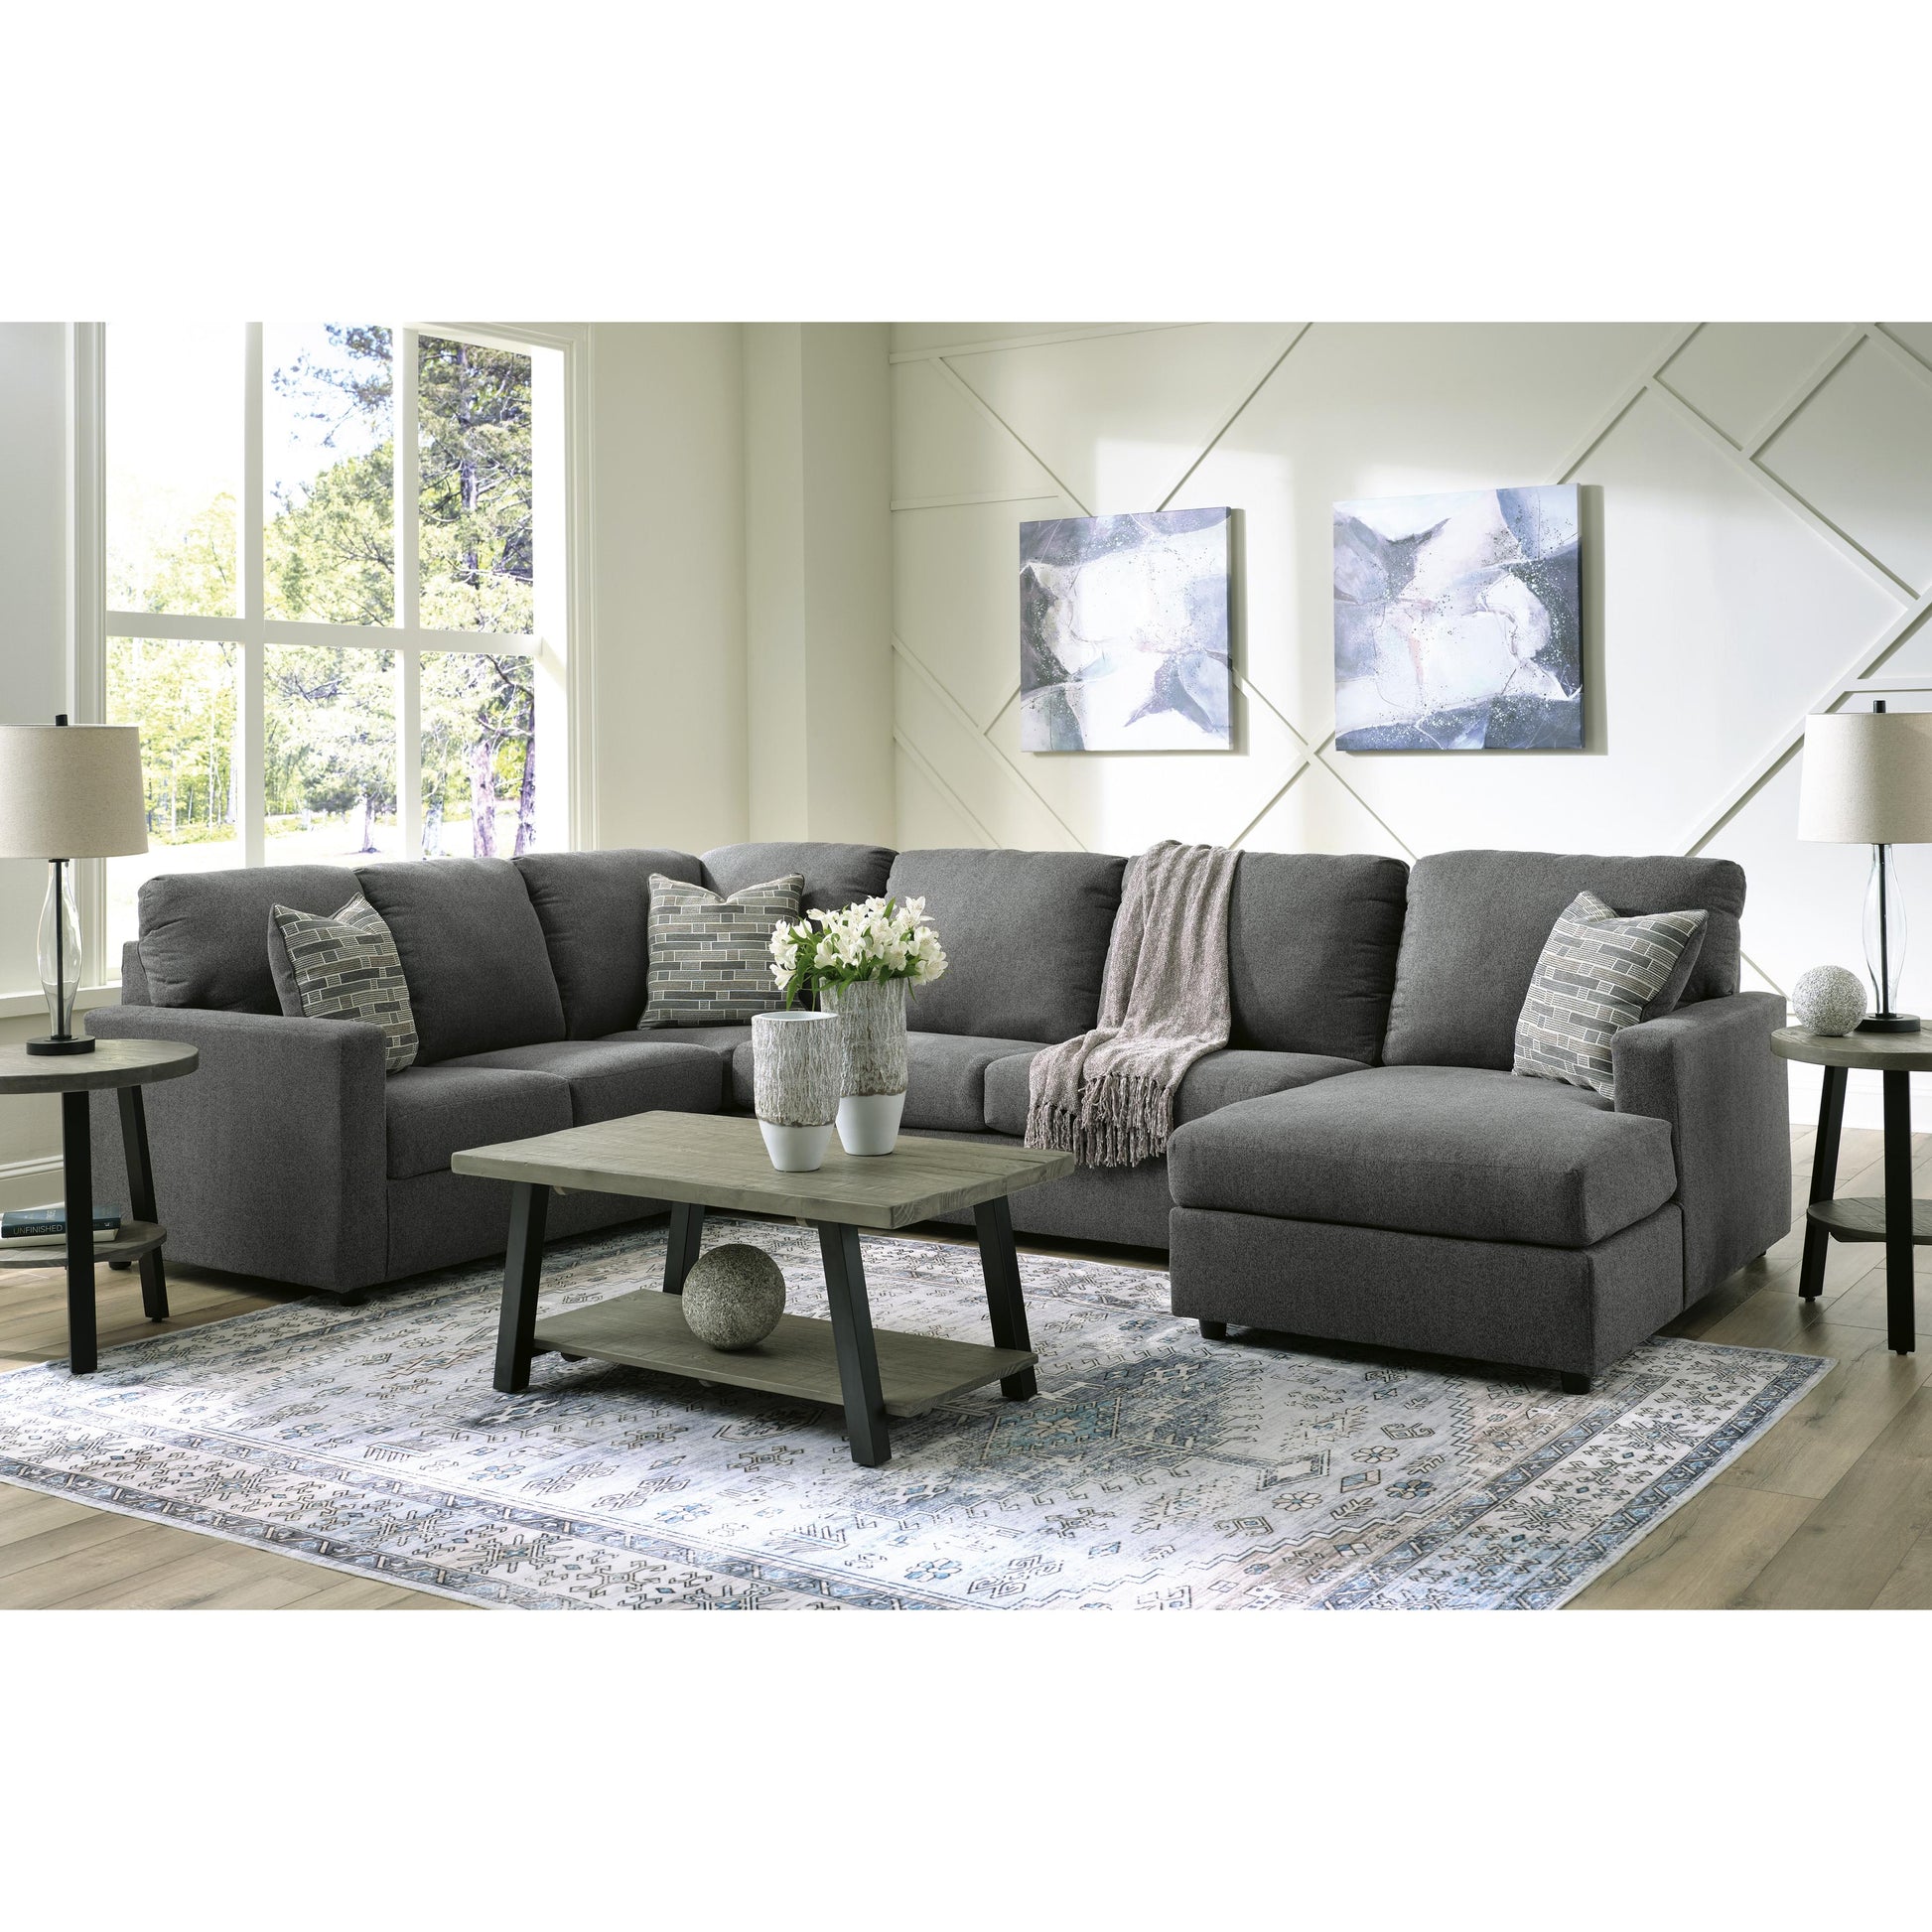 Signature Design by Ashley Edenfield Fabric 3 pc Sectional 2900348/2900334/2900317 IMAGE 4